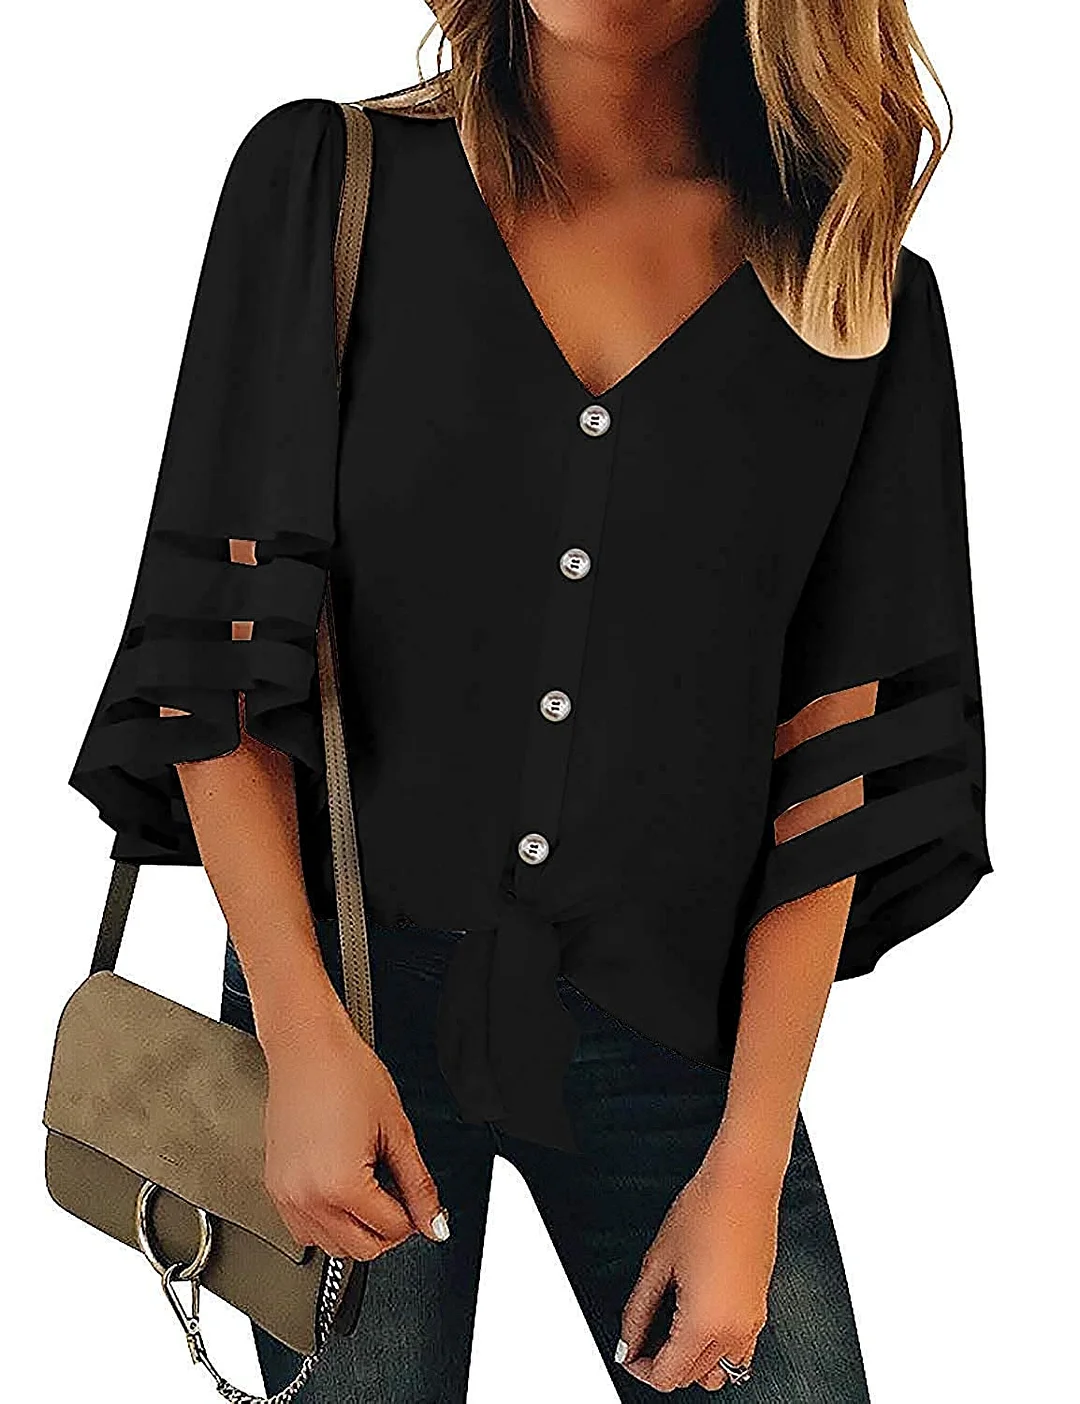 Women Summer Top V Neck Button Down Blouse Sleeveless Cami Strappy Tank Top/Mesh Panel Bell Sleeve Tie Front Shirt for Choice